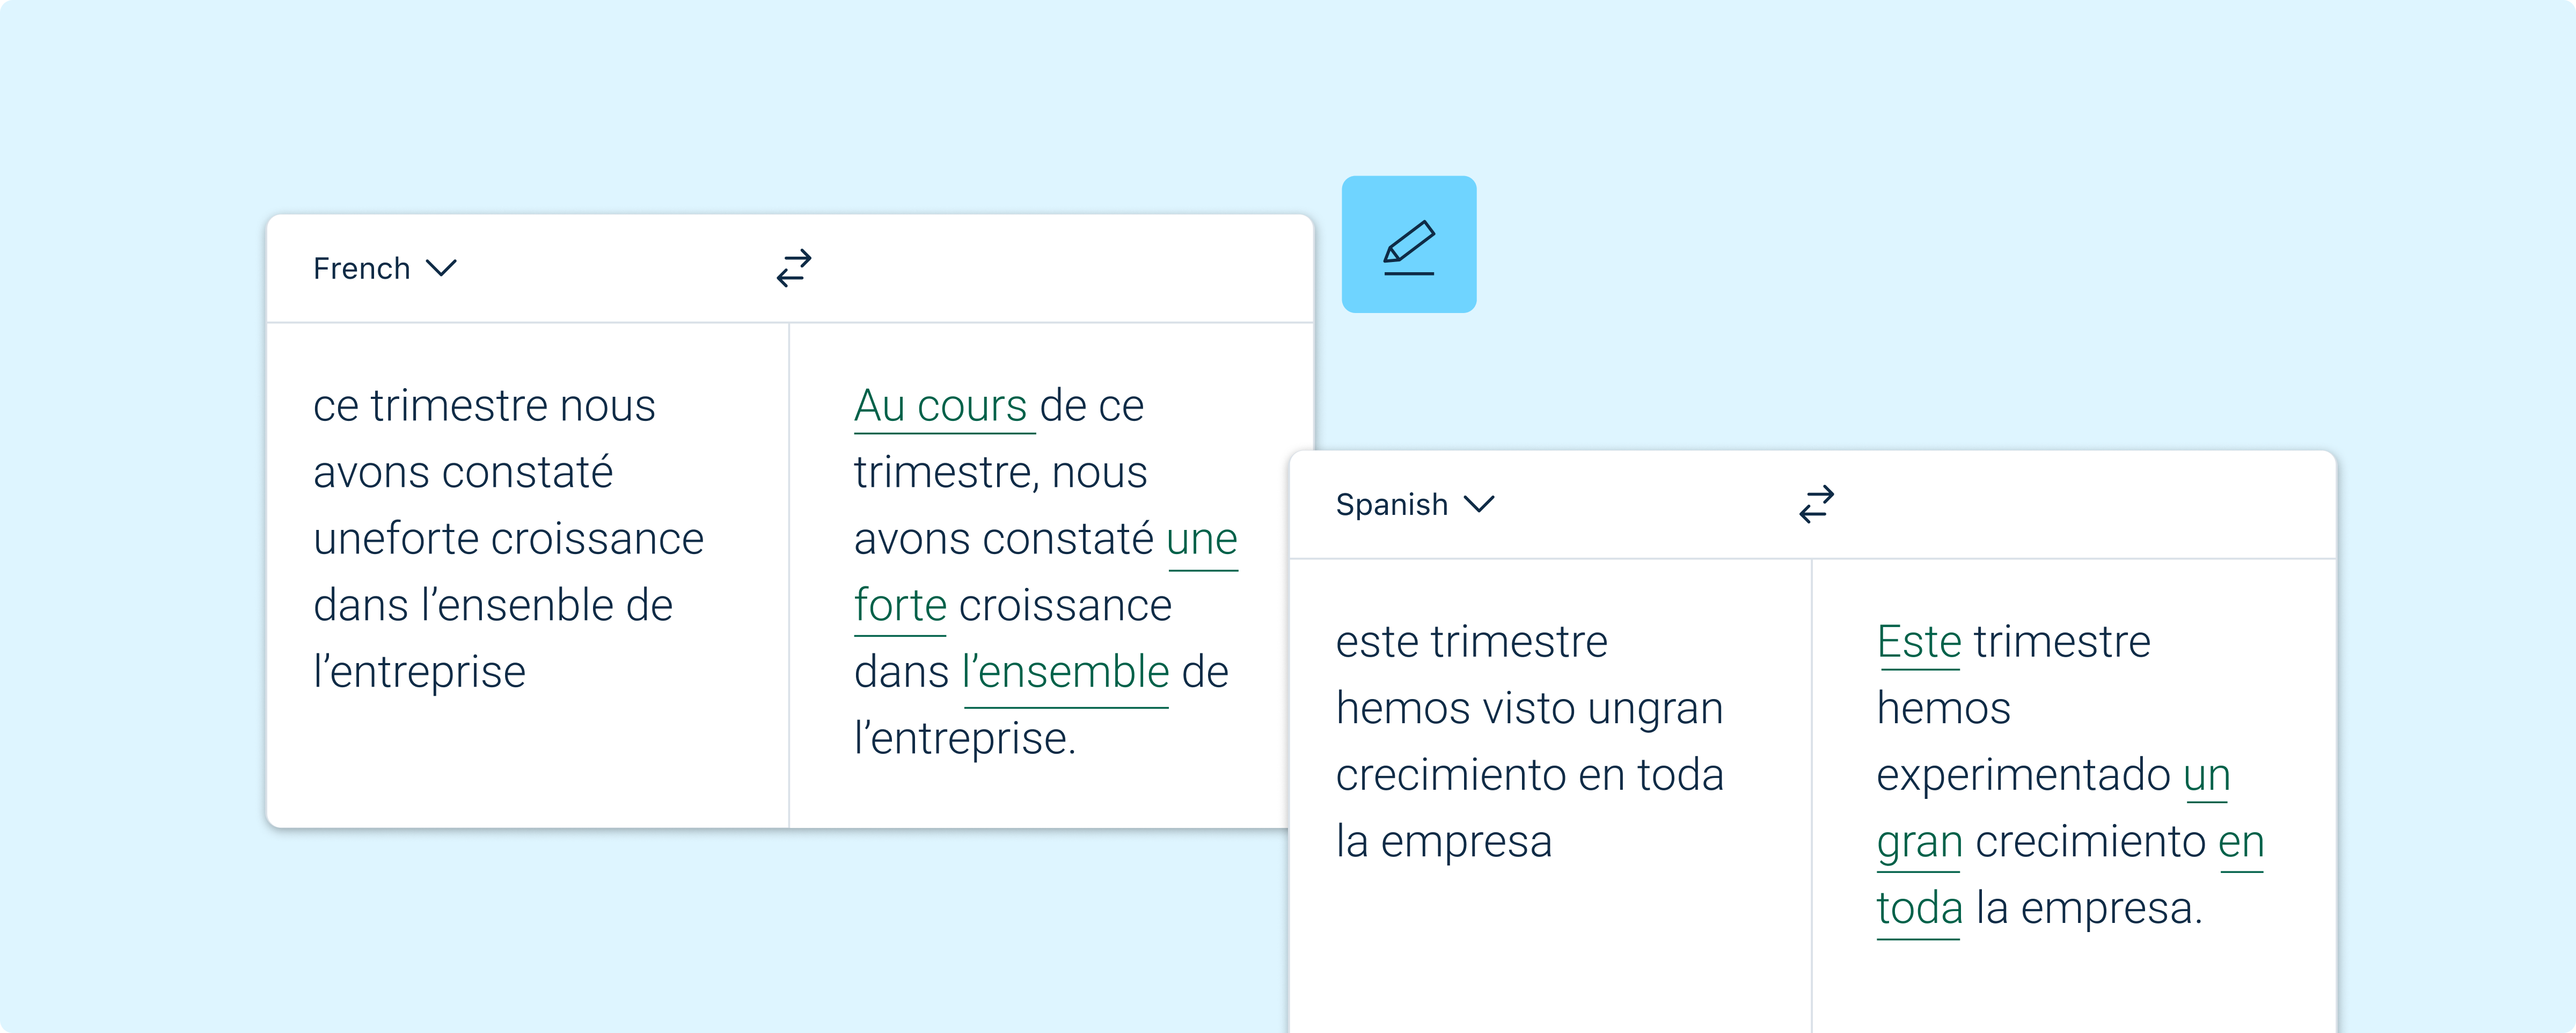 Illustration of Write UI showing an example correcting spelling mistakes for great writing in French and Spanish